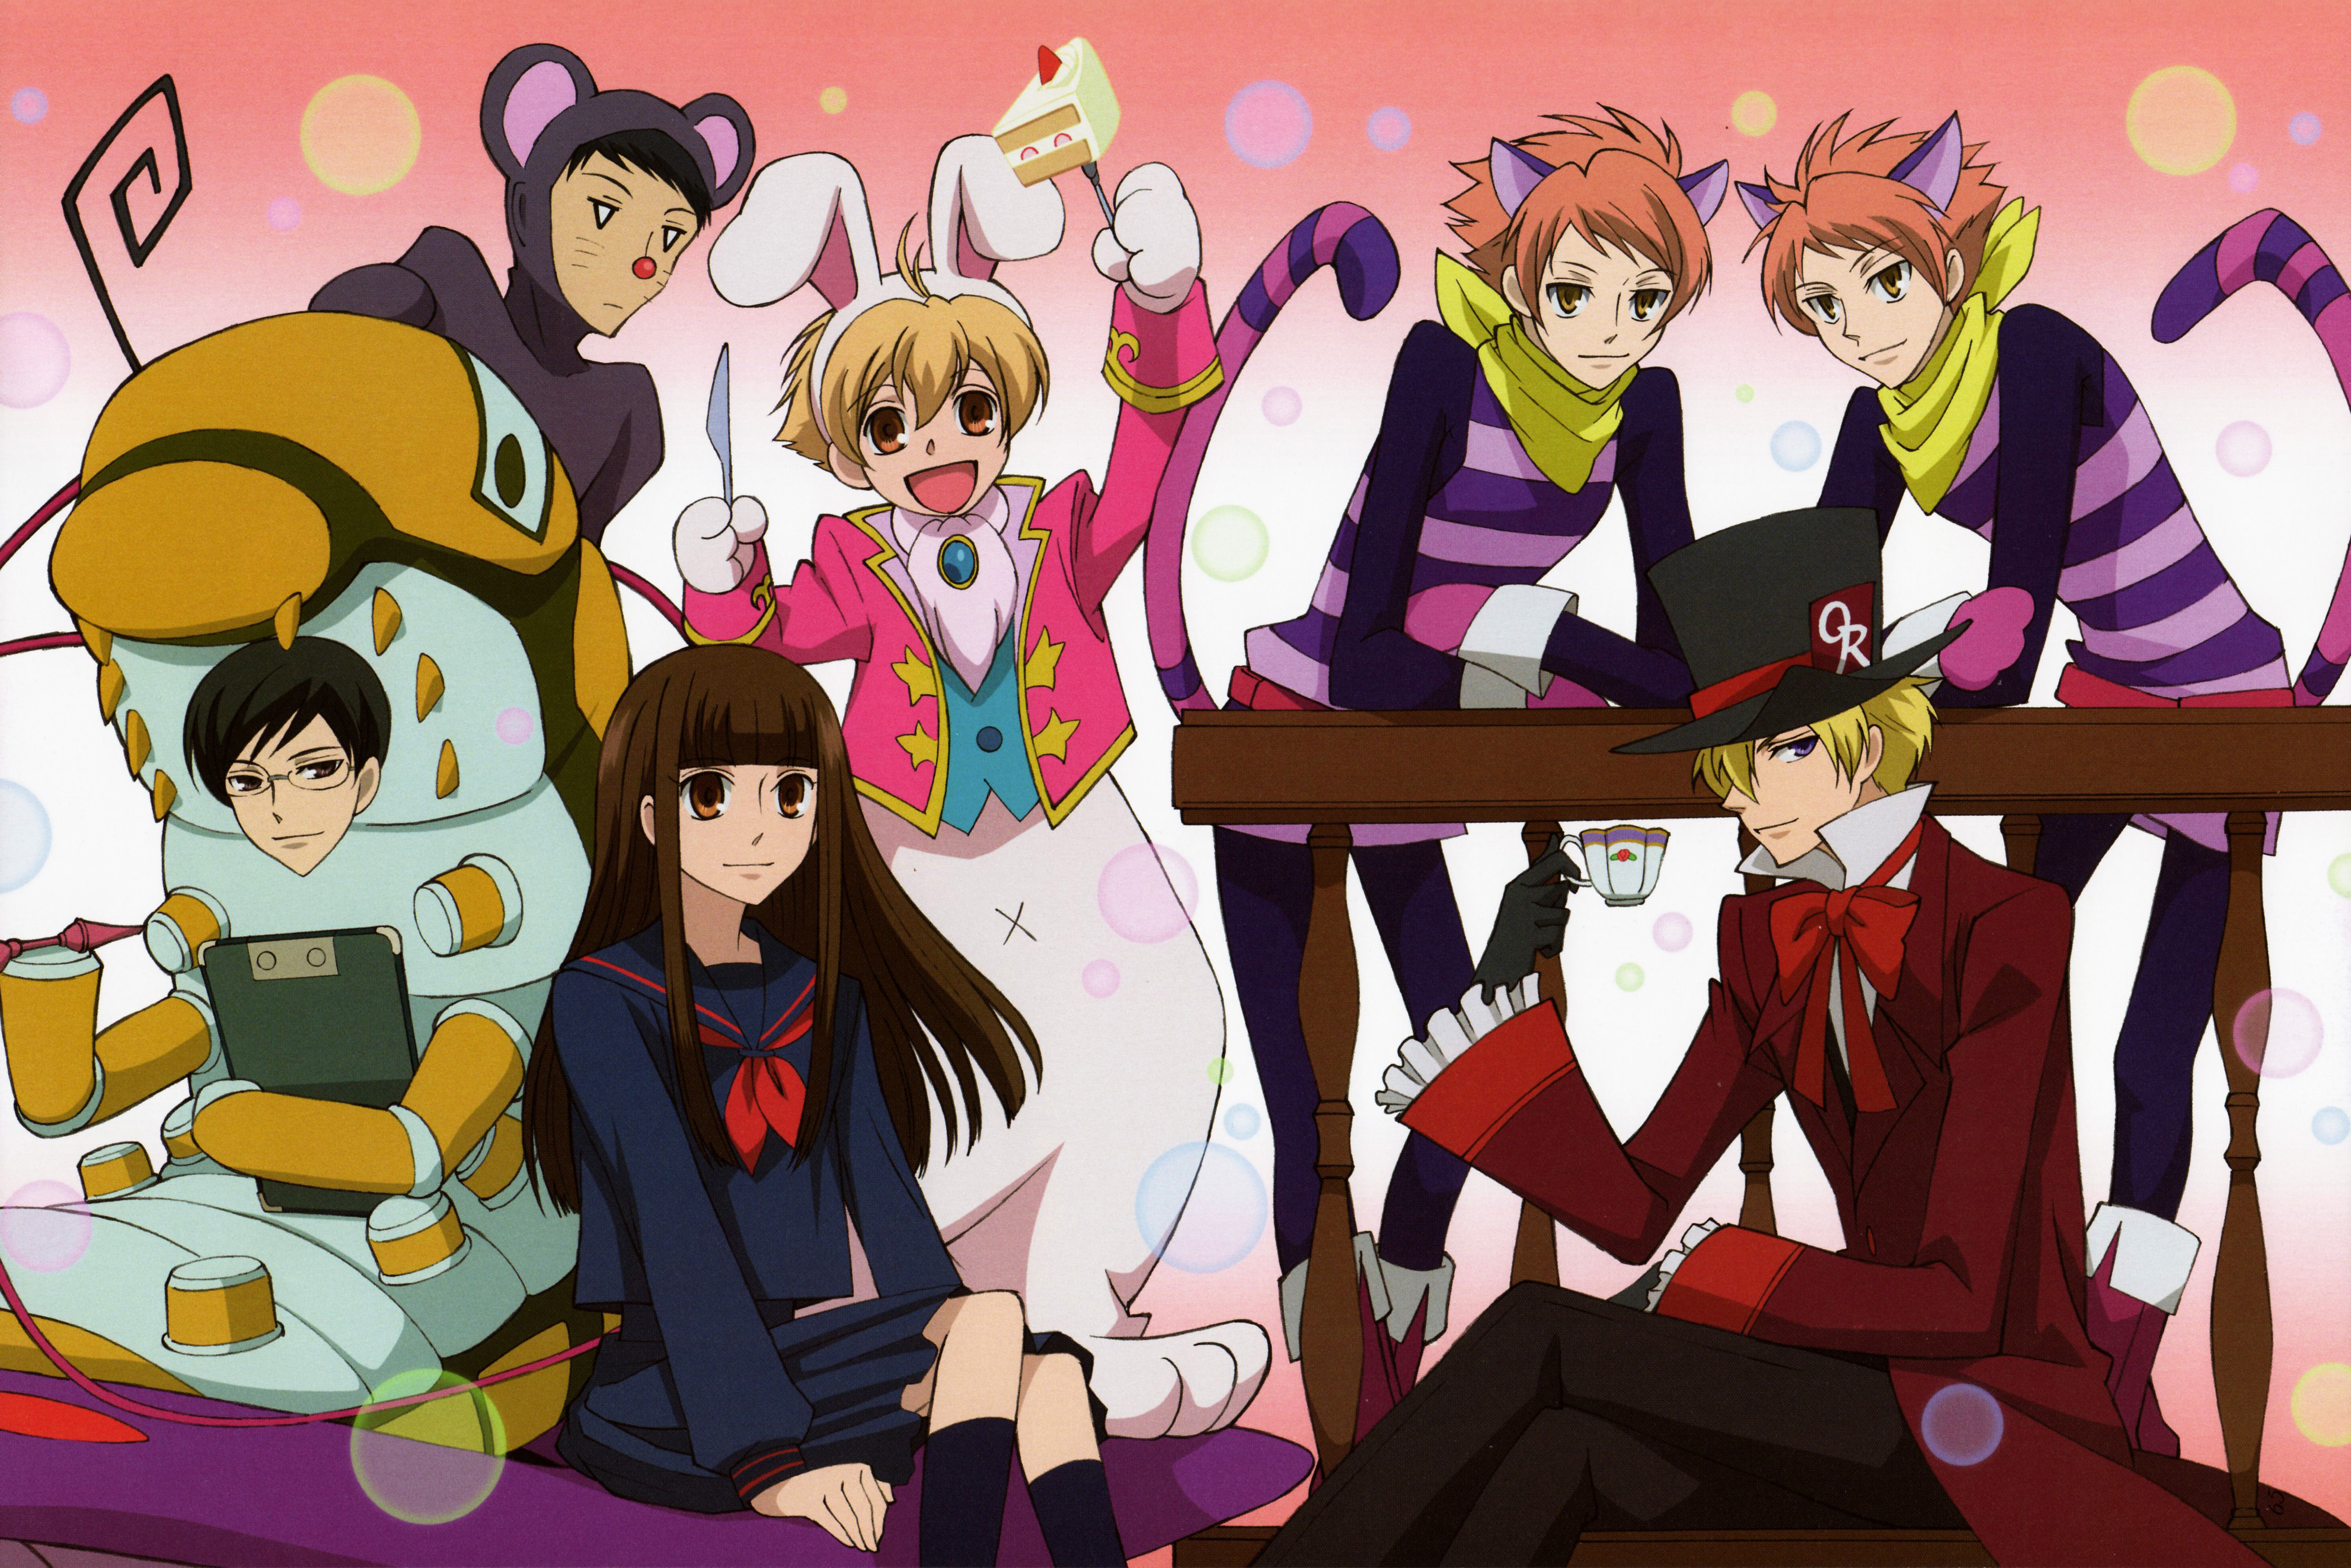 HD desktop wallpaper of Ouran High School Host Club characters in various colorful costumes against a playful background.